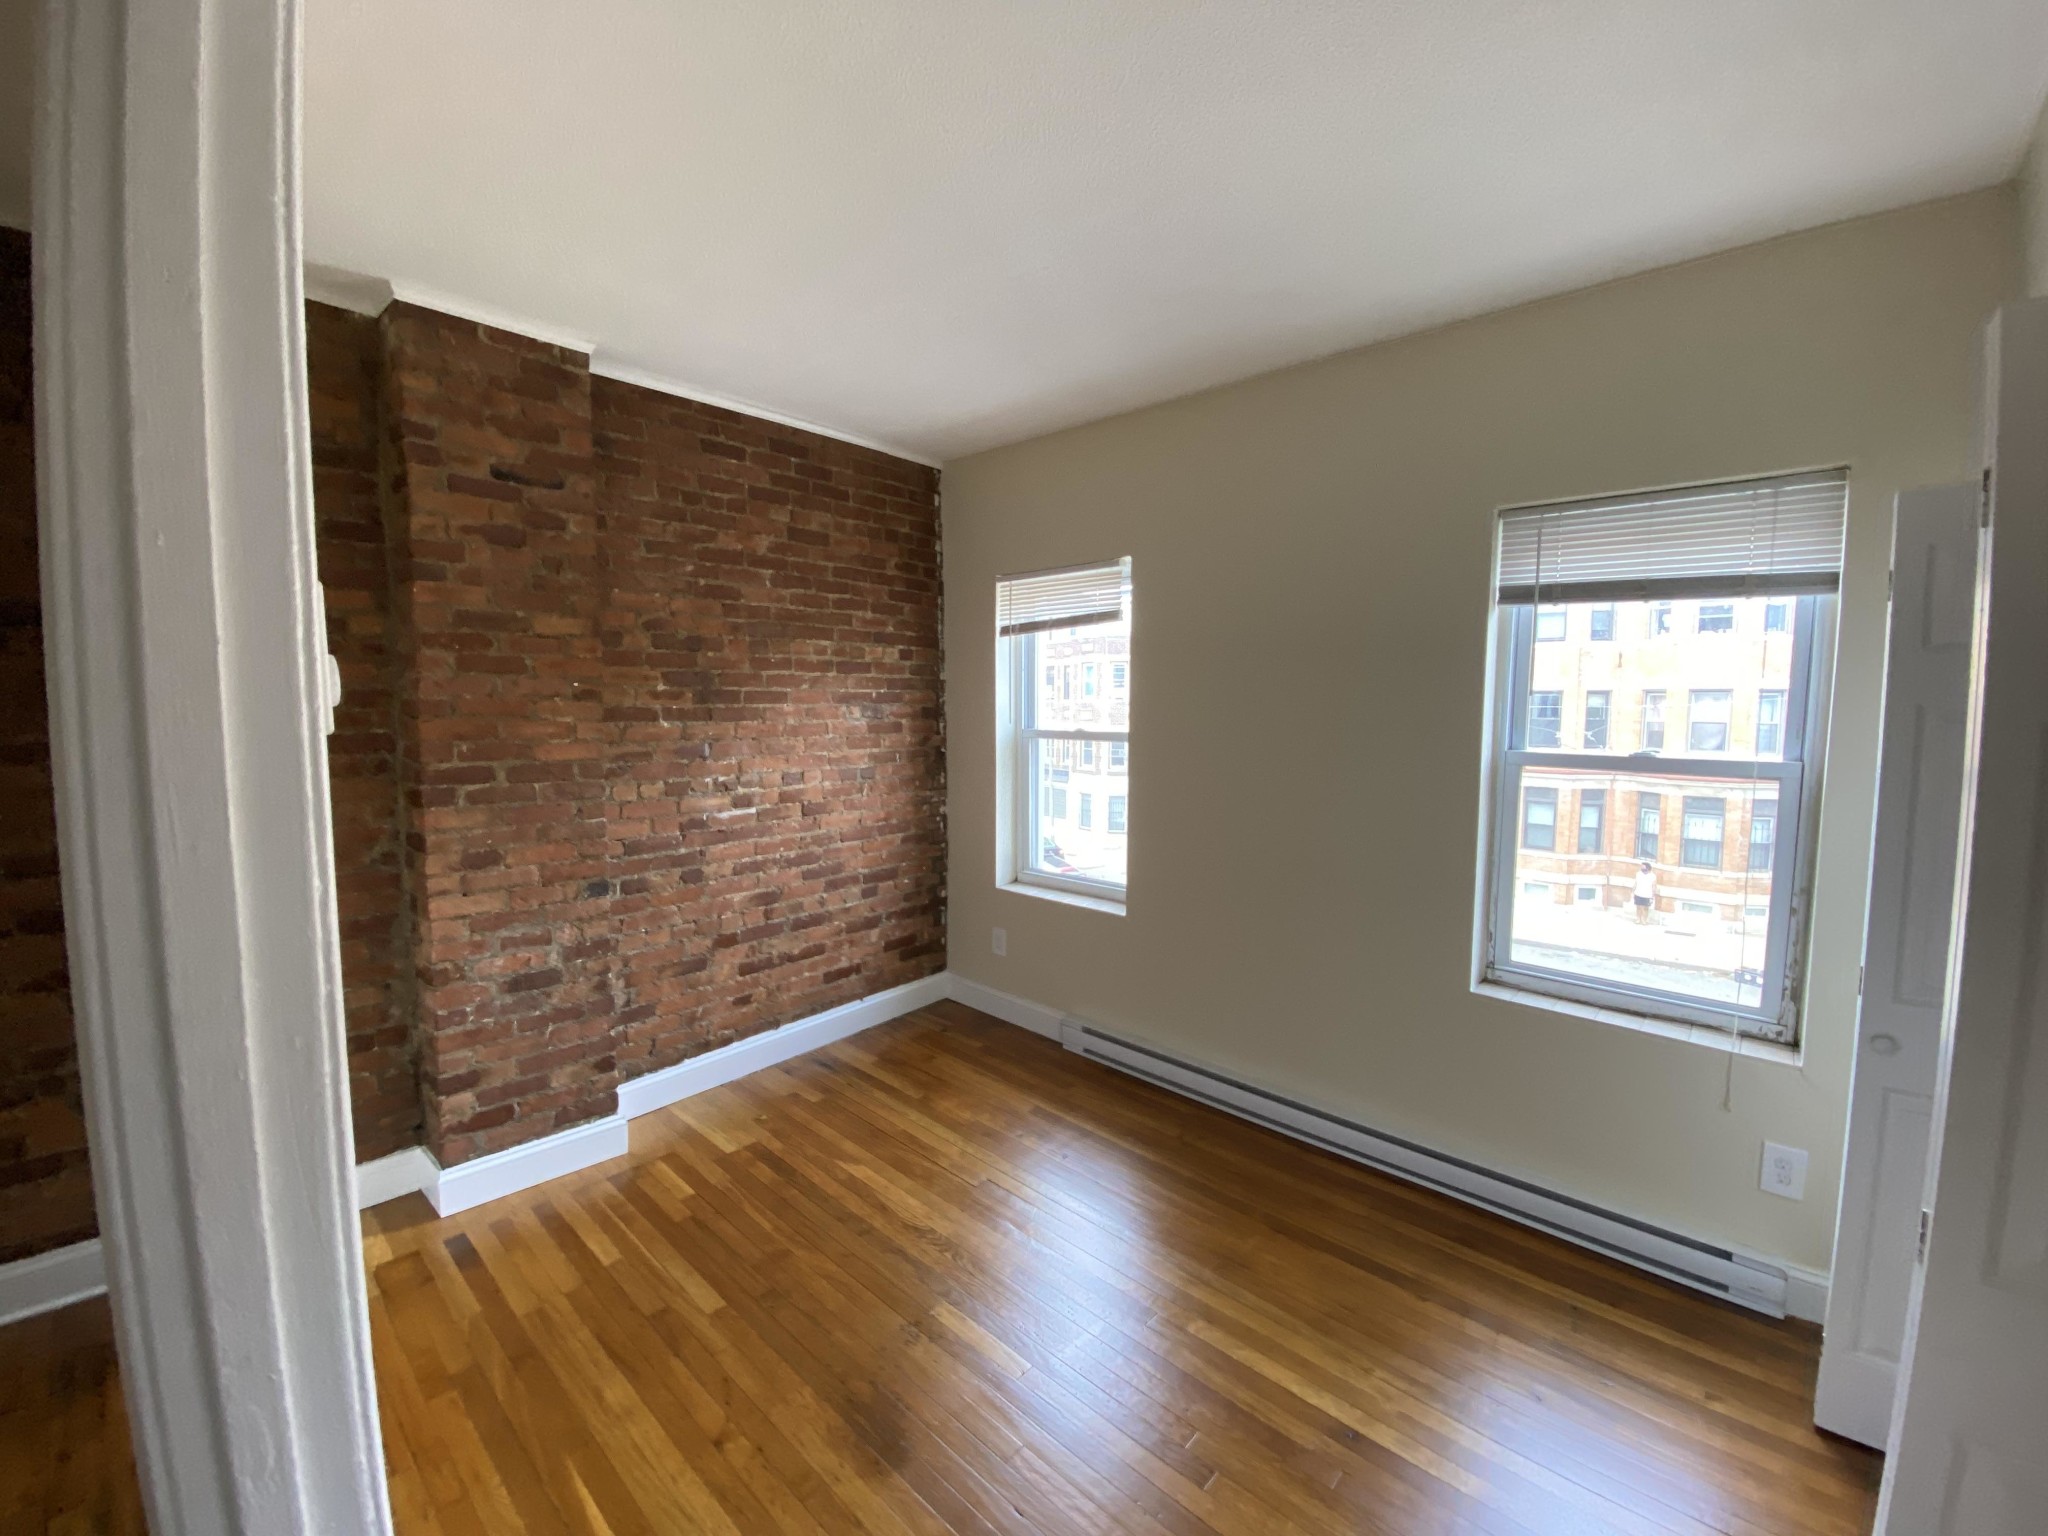 Photos of apartment on Commonwealth Ave.,Boston MA 02115